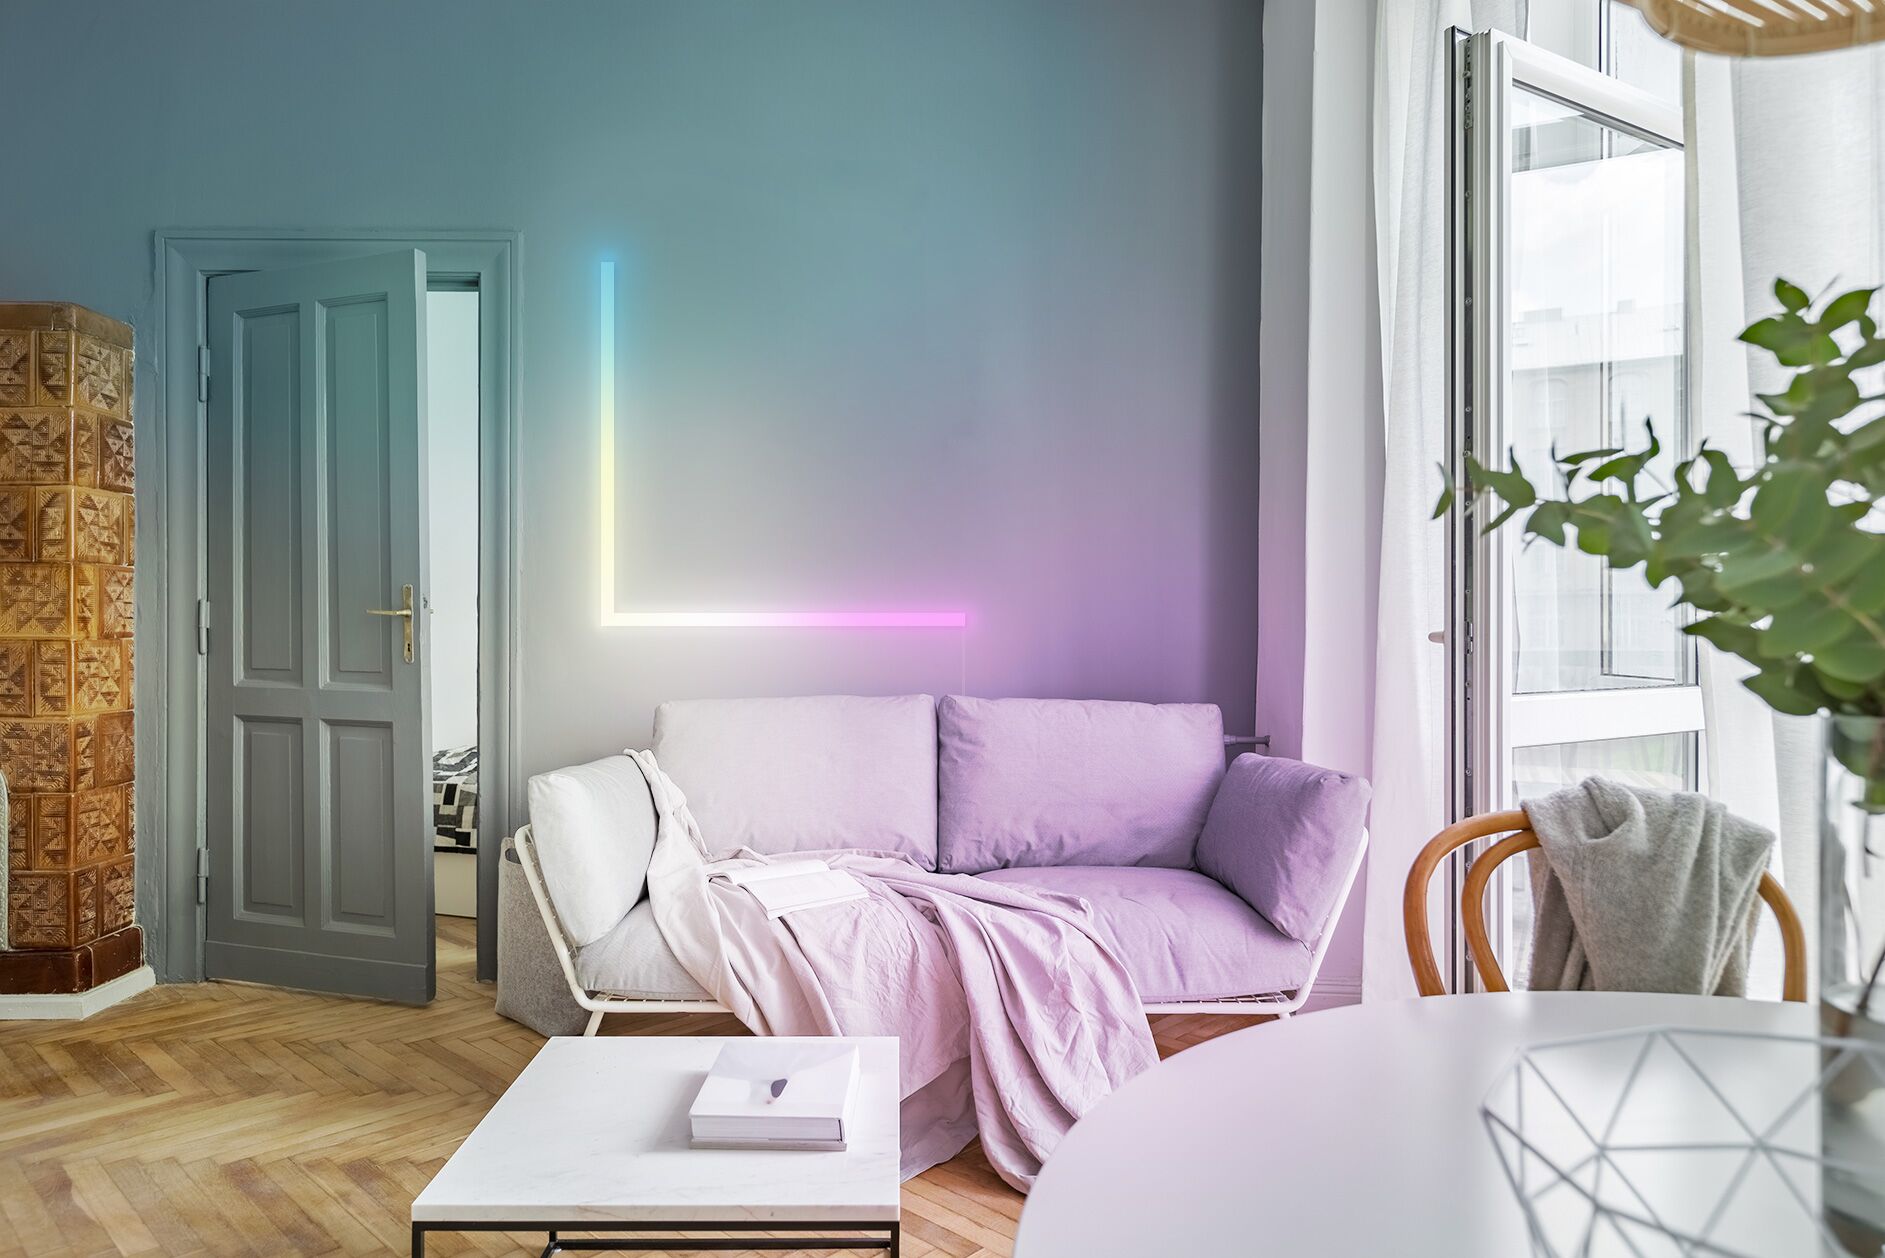 LIFX Beam Color Smart Light, No Hub Required - image 1 of 10